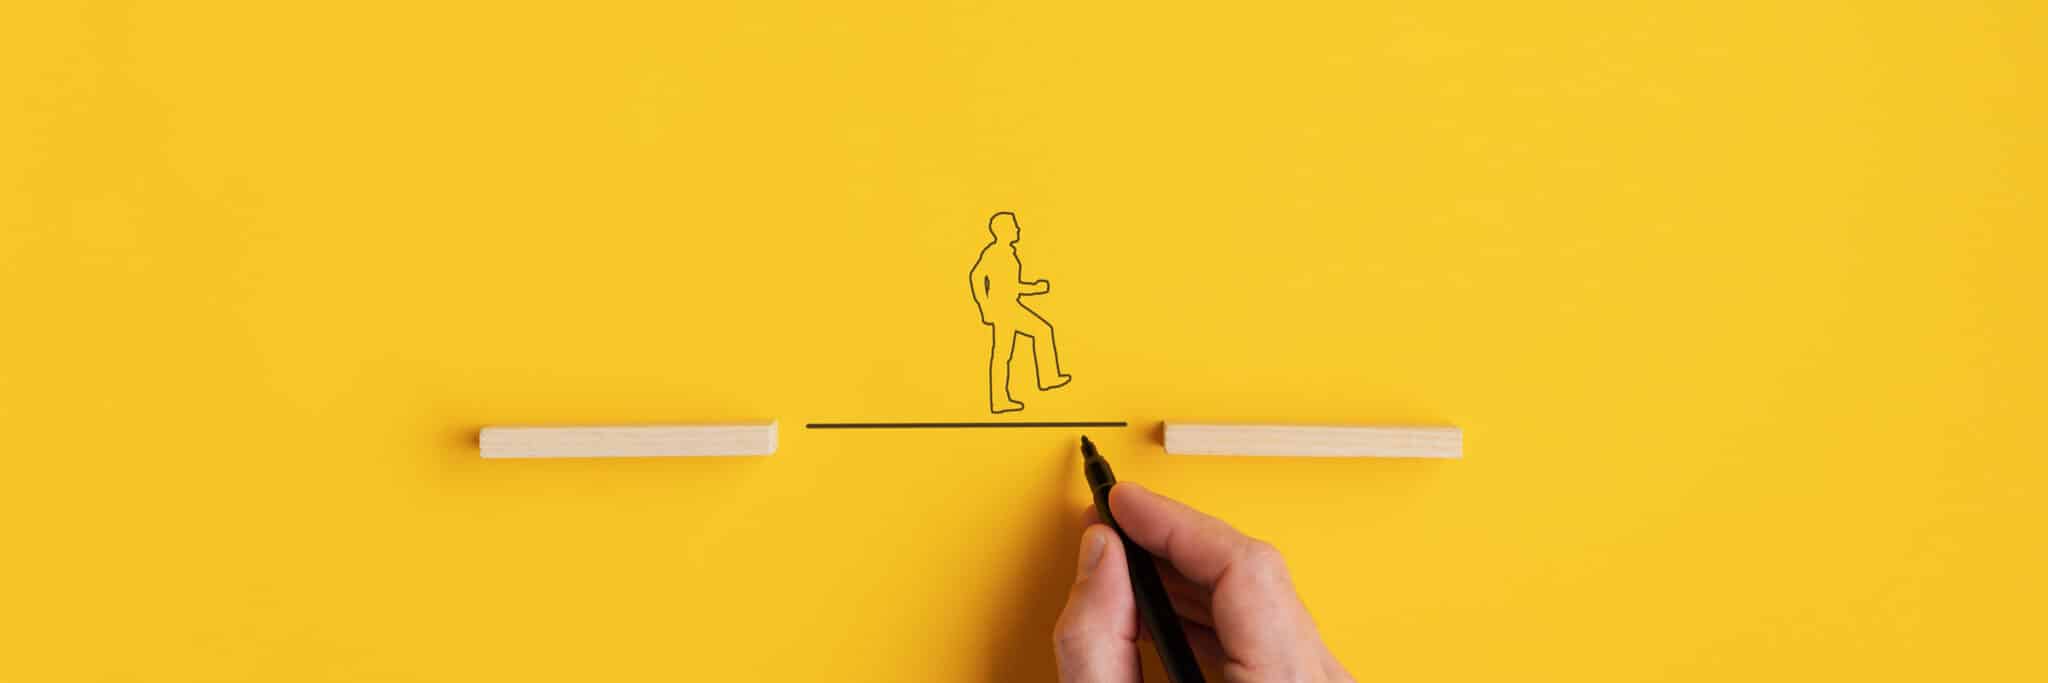 Wide view image of male hand drawing a line between two wooden pegs for a silhouette of a man to walk across. Over yellow background with copy space.